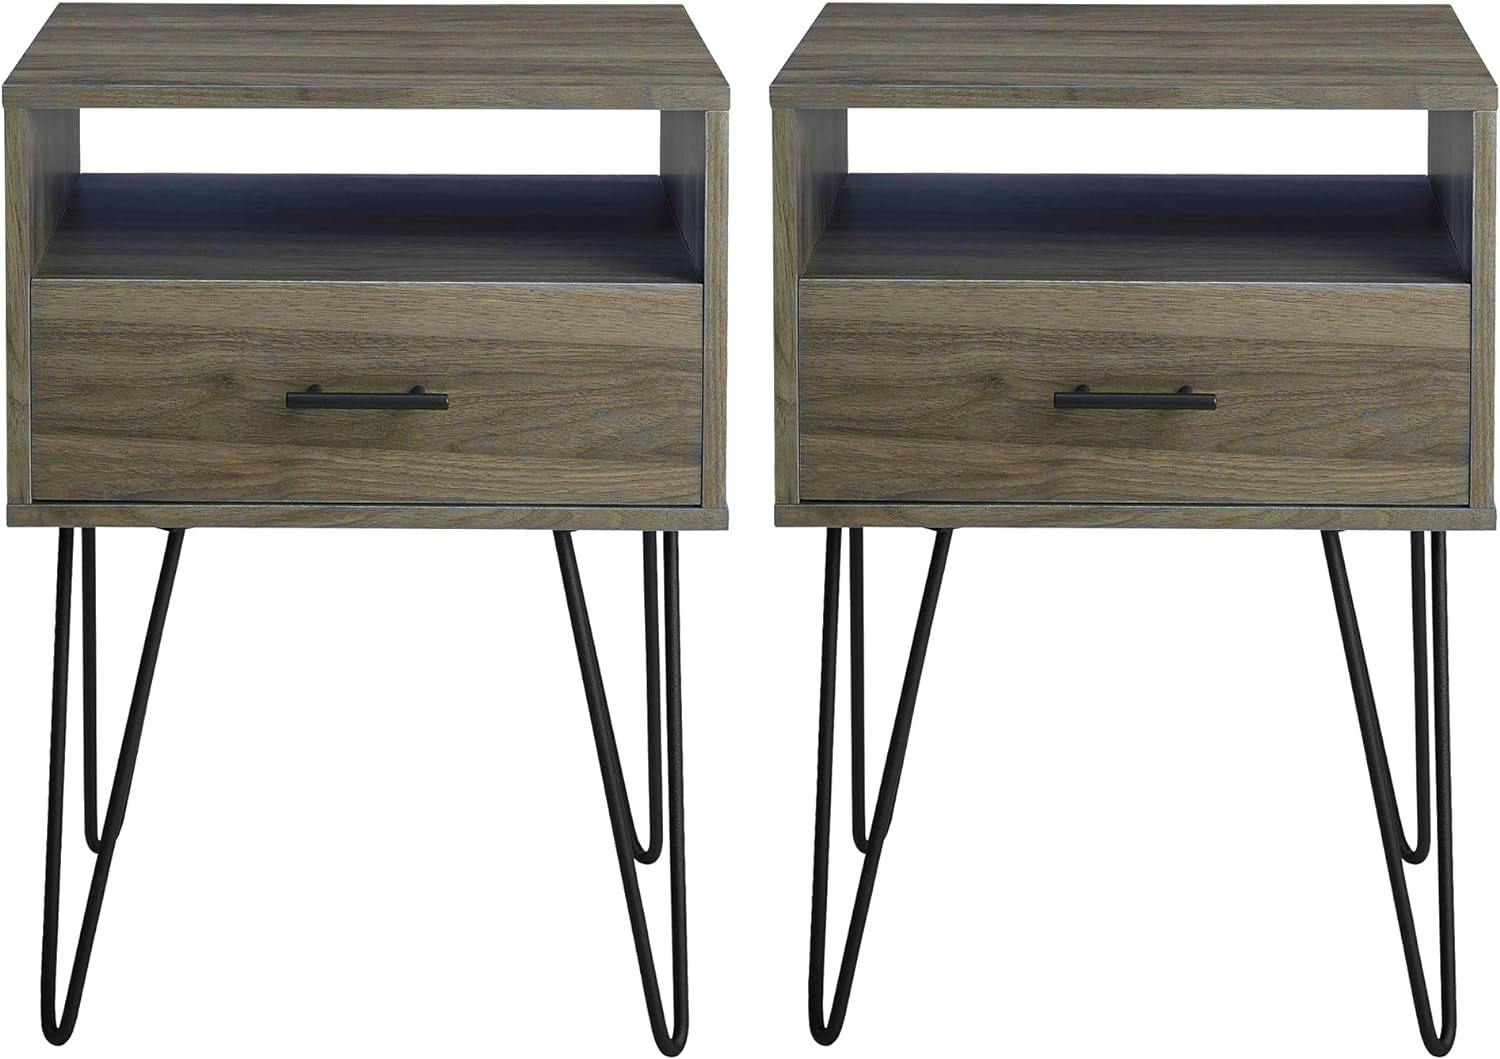 Slate Grey Alloy Steel & MDF Mid-Century Modern Side Table Set with Storage